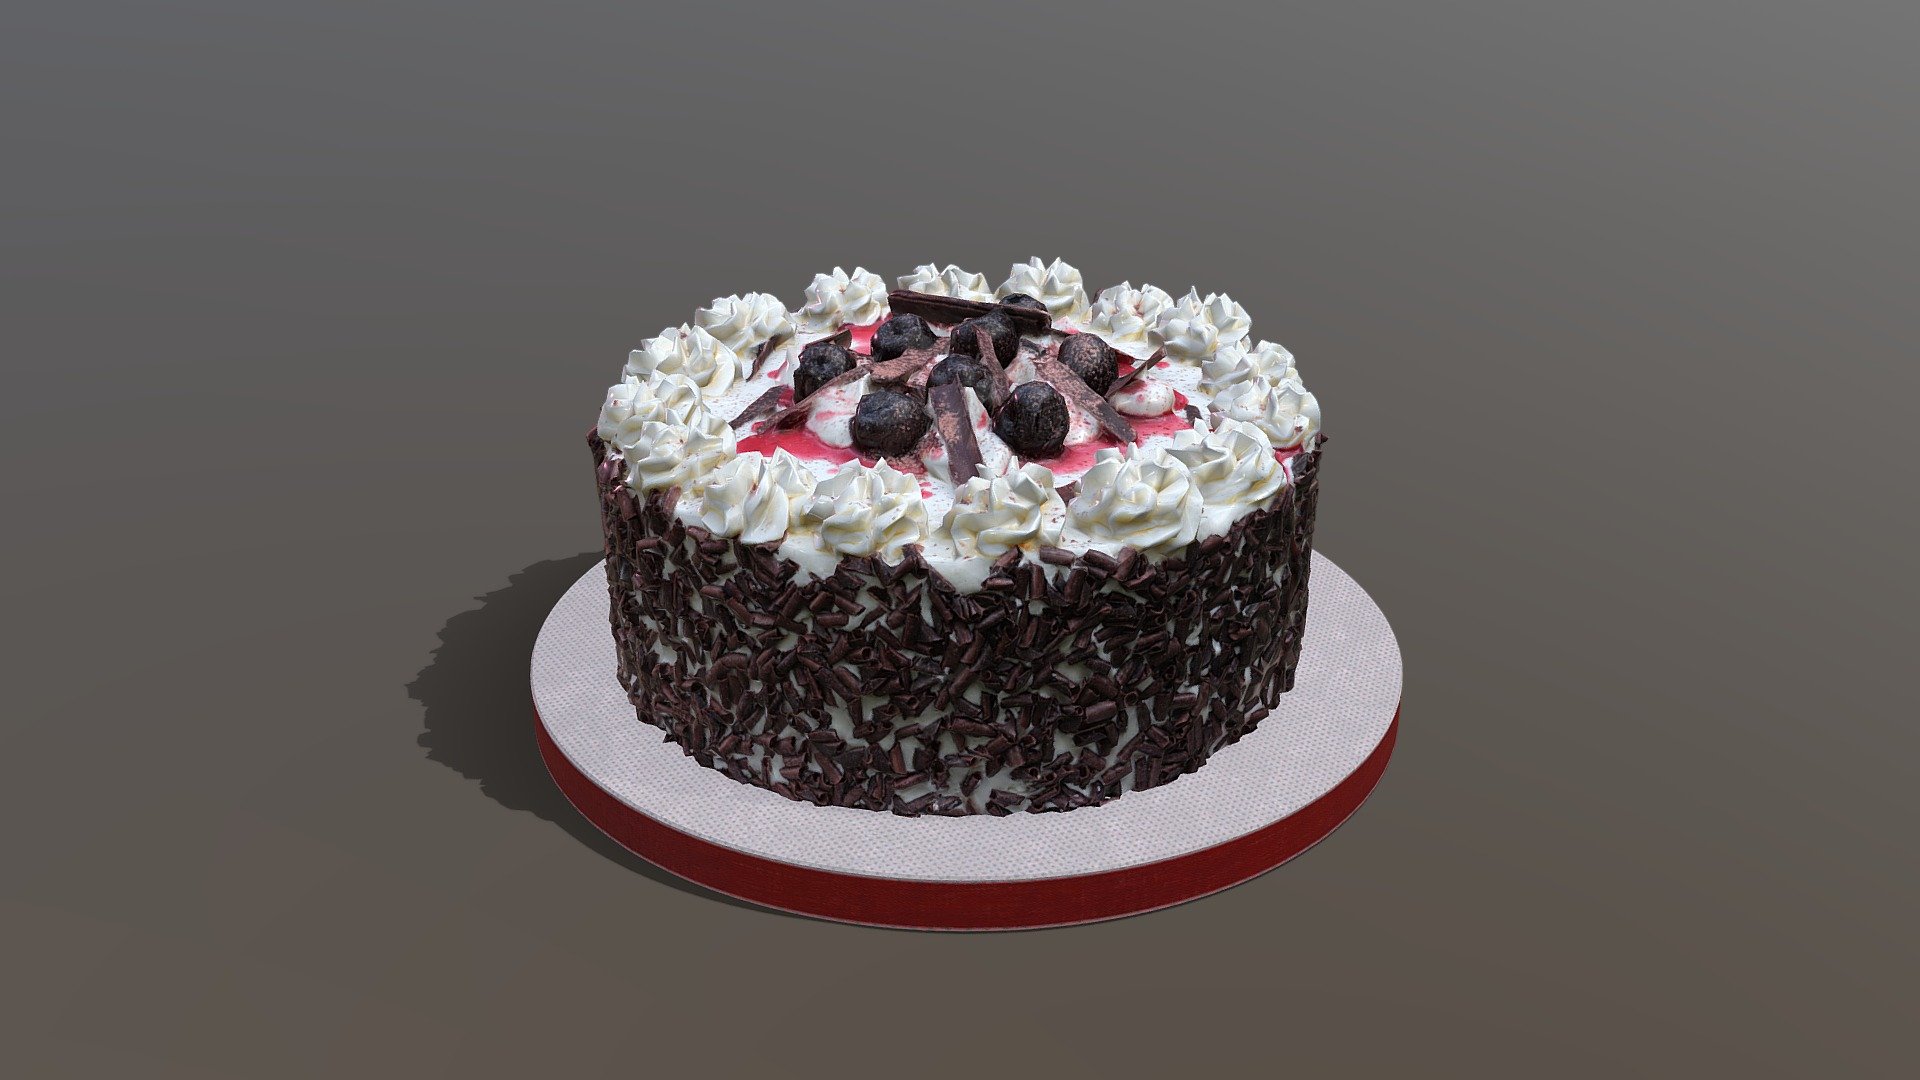 This iconic Black Forest Gateau model was created using photogrammetry which is made by CAKESBURG Premium Cake Shop in the UK. You can purchase real cake from this link: https://cakesburg.co.uk/products/black-forest-cake?_pos=3&amp;_sid=809787975&amp;_ss=r

Textures 4096*4096px PBR photoscan-based materials Base Color, Normal, Roughness, Specular)

Click here for the cut &amp; slice version.

Click here for a slice of cake model 3d model